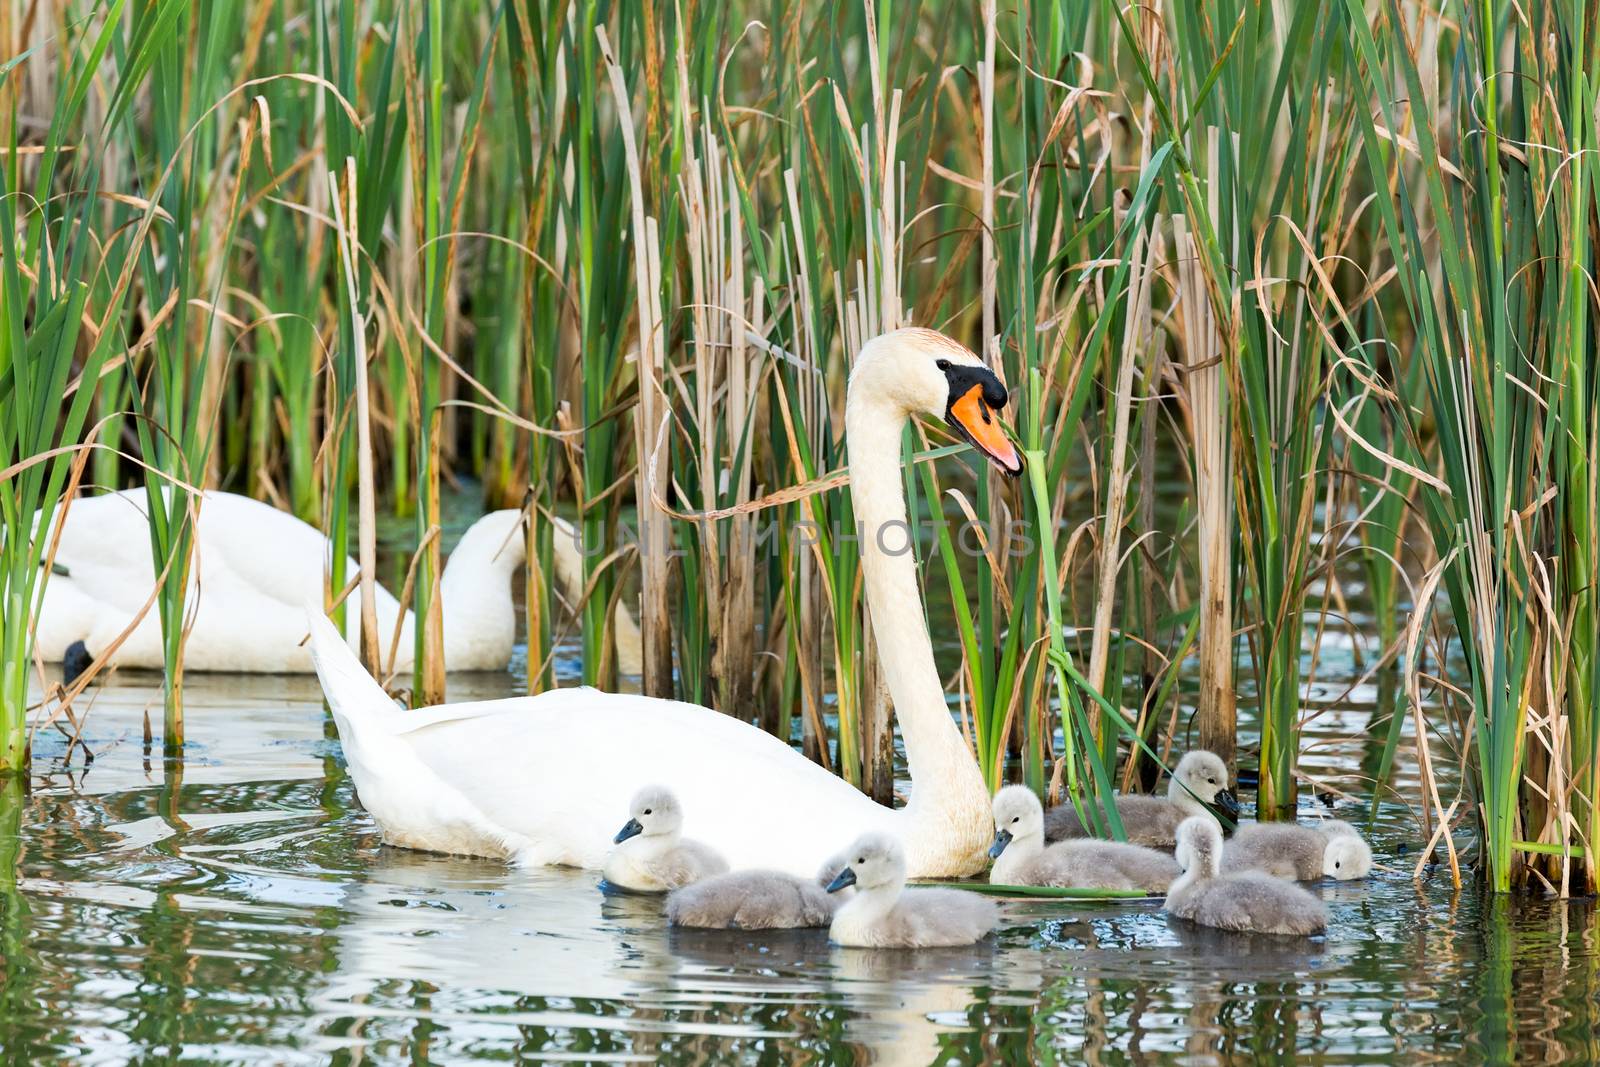 Couple white swans with young cygnets swimming on water with reed